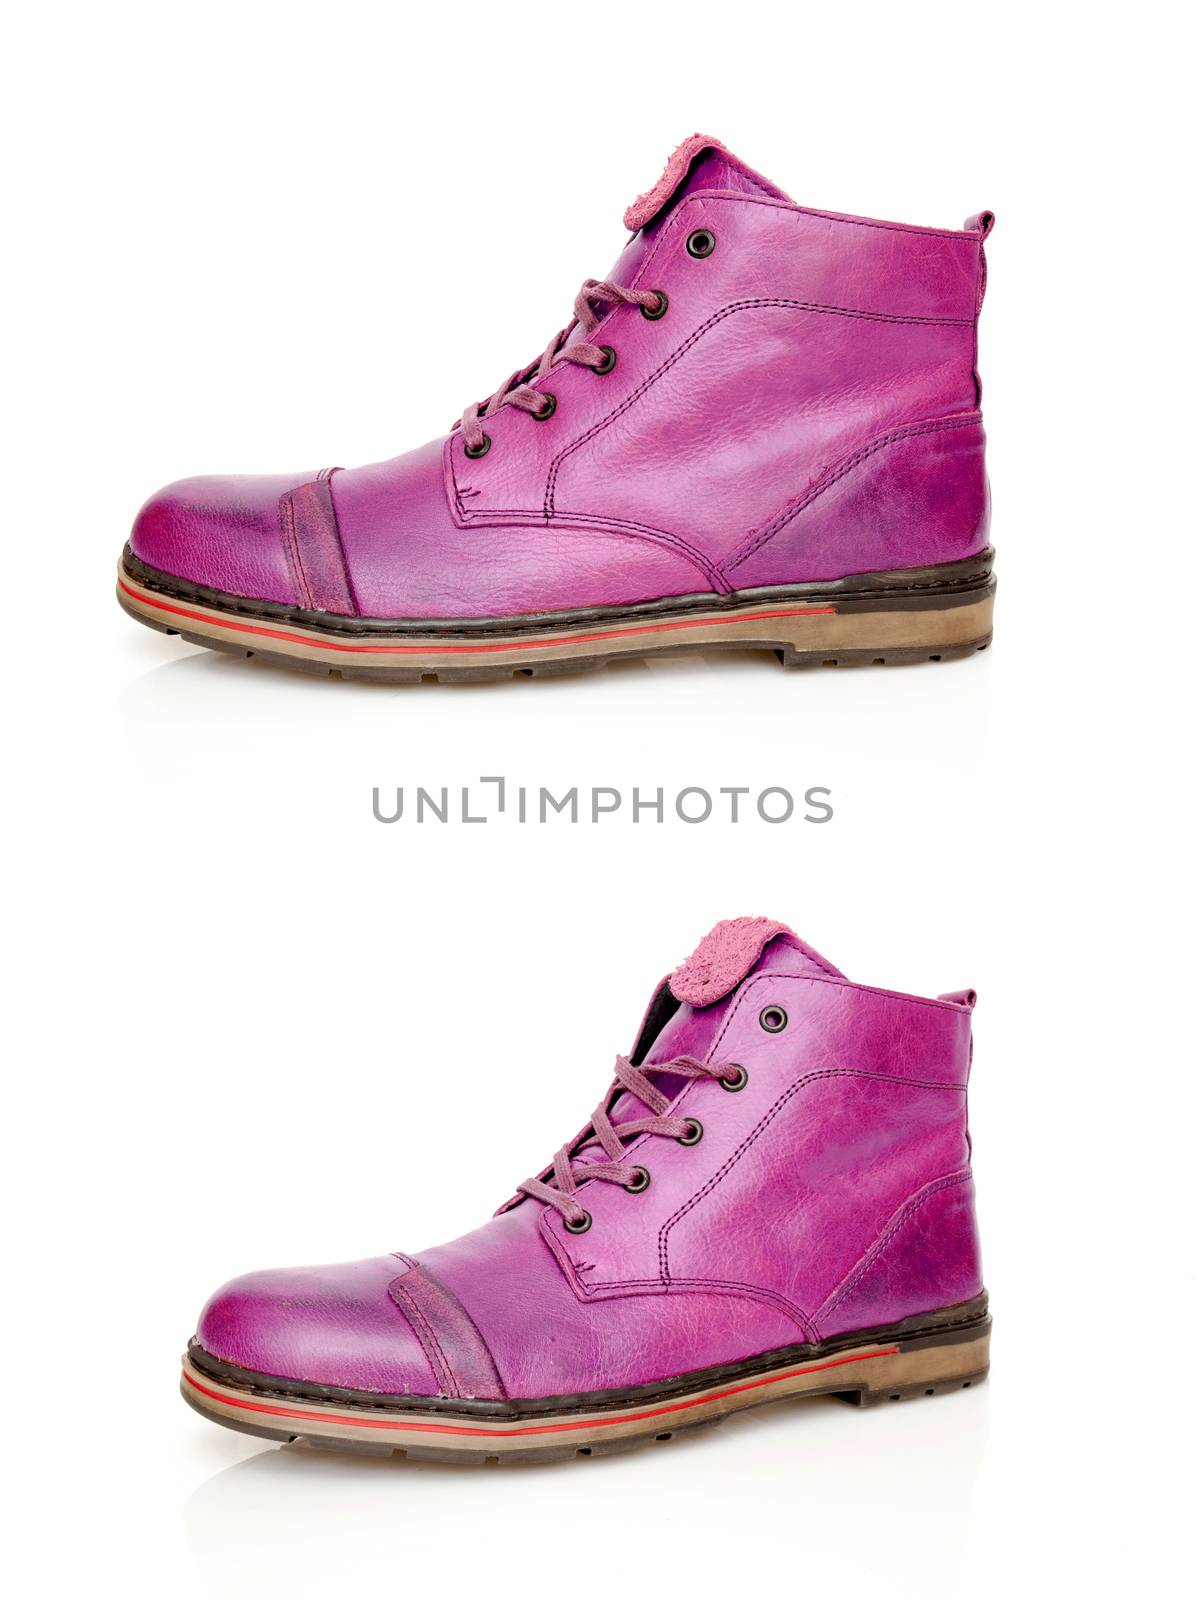 Male purple boots on white background, isolated product.